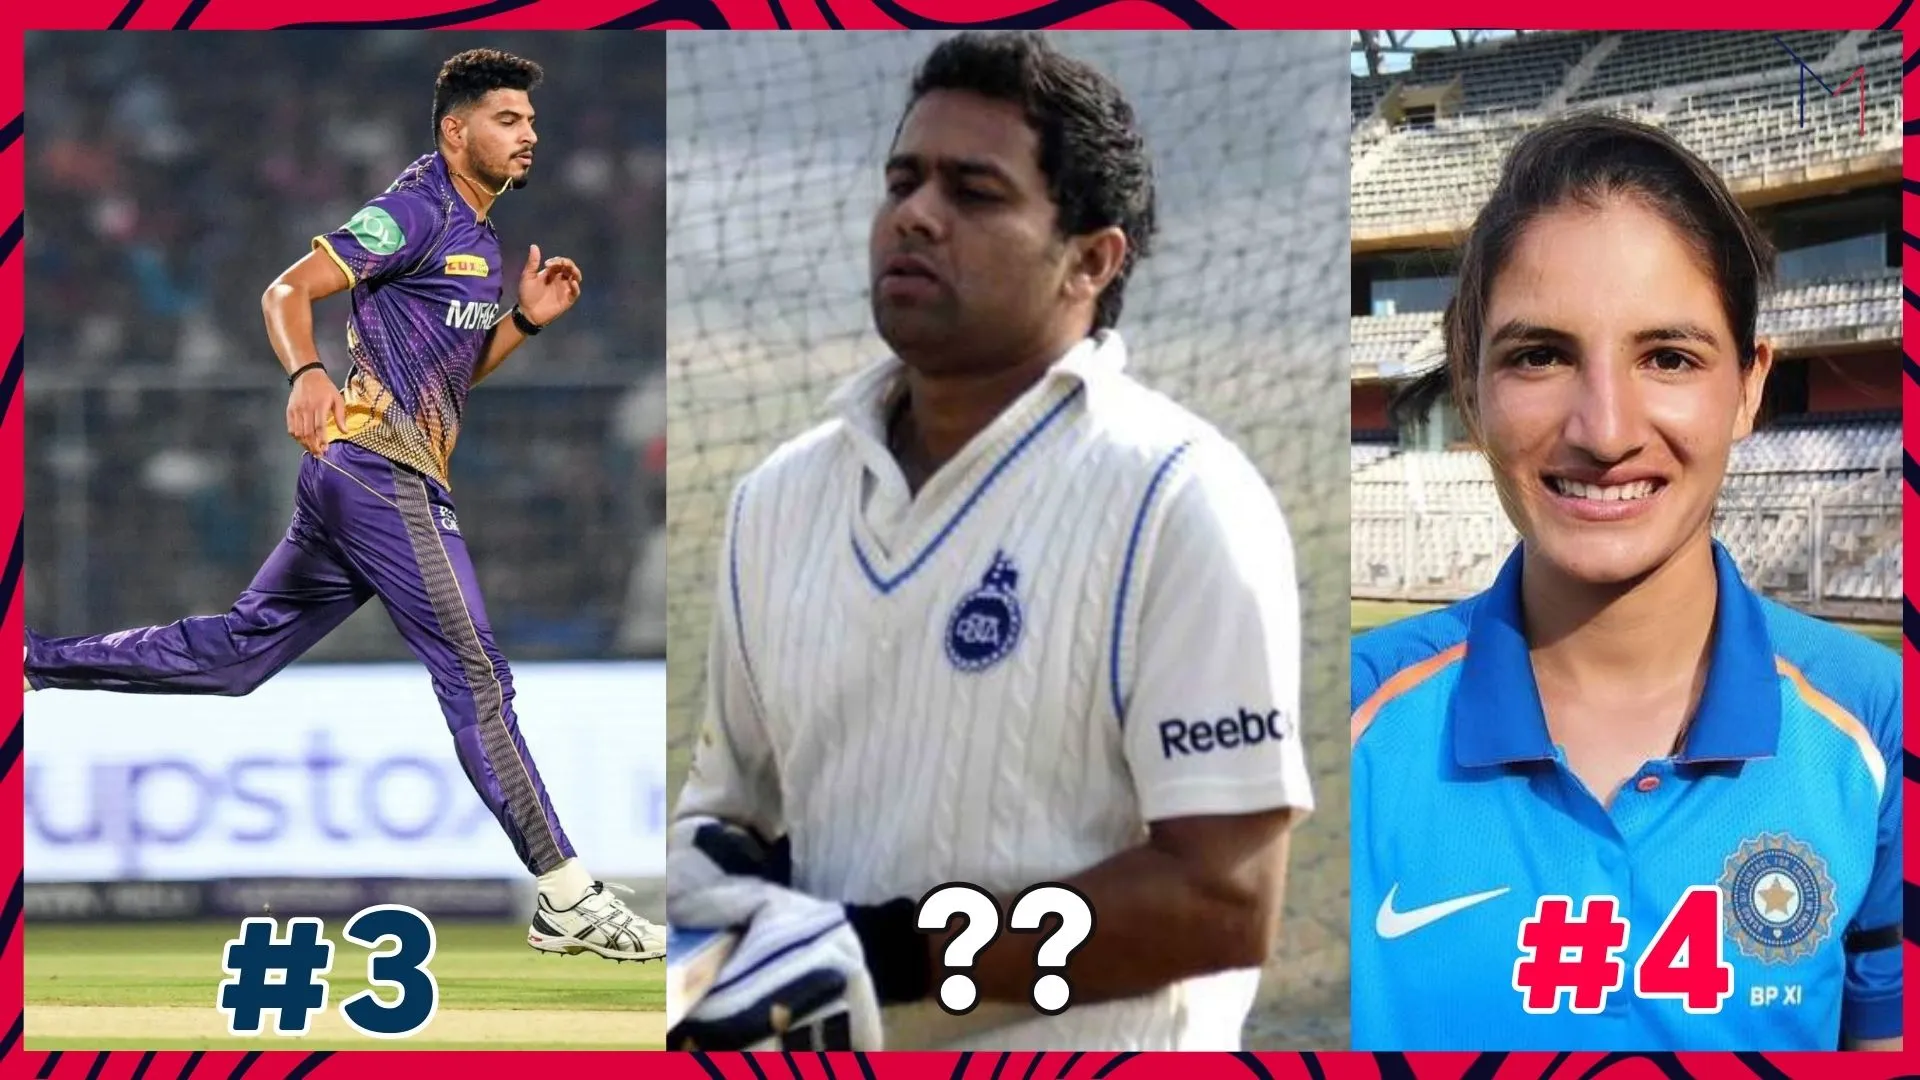 Top 5 most popular cricketers from Himachal Pradesh - Famous cricket players from Himachal Pradesh